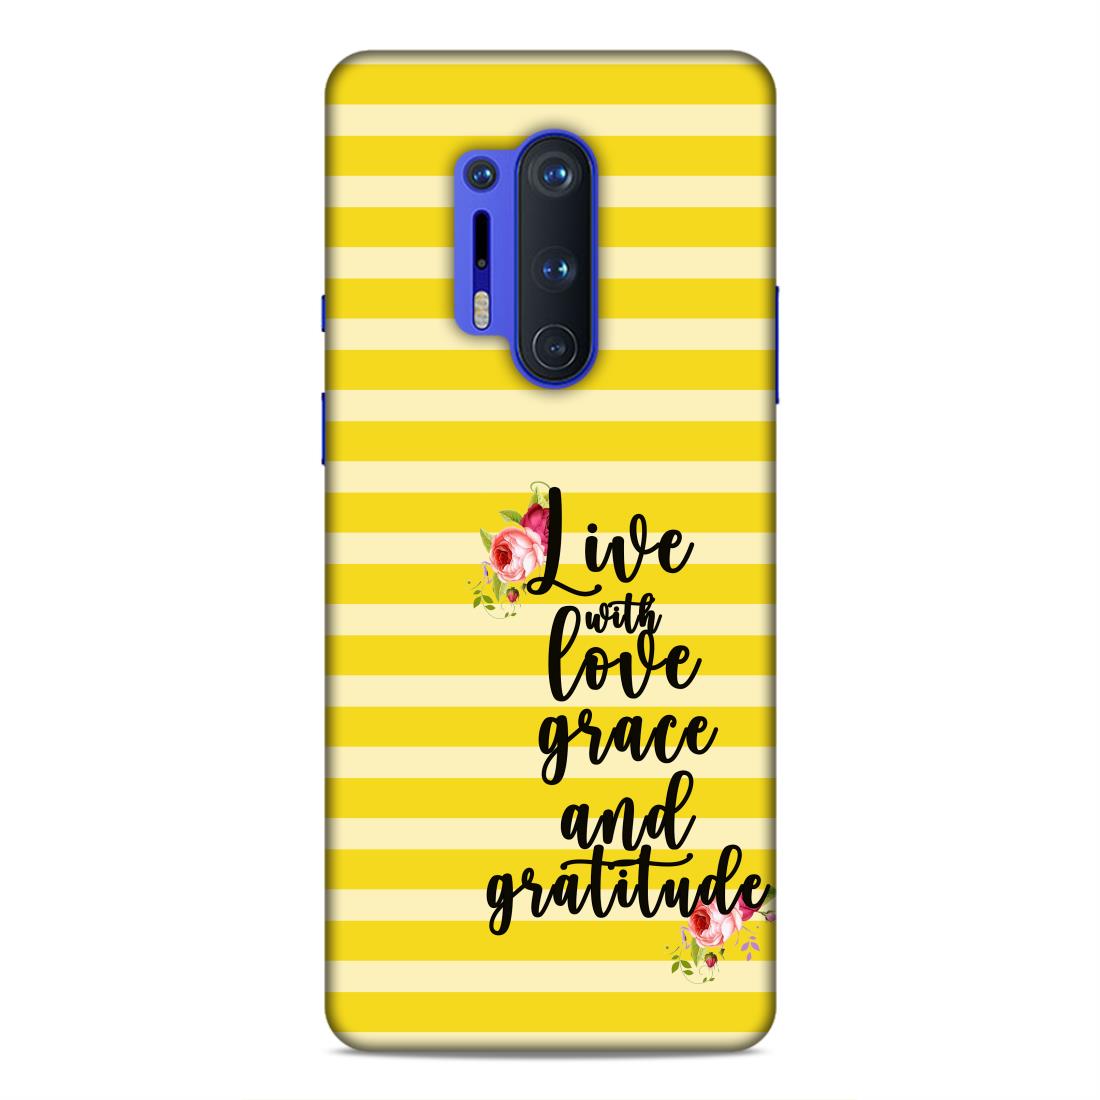 Live with Love Grace and Gratitude Hard Back Case For OnePlus 8 Pro